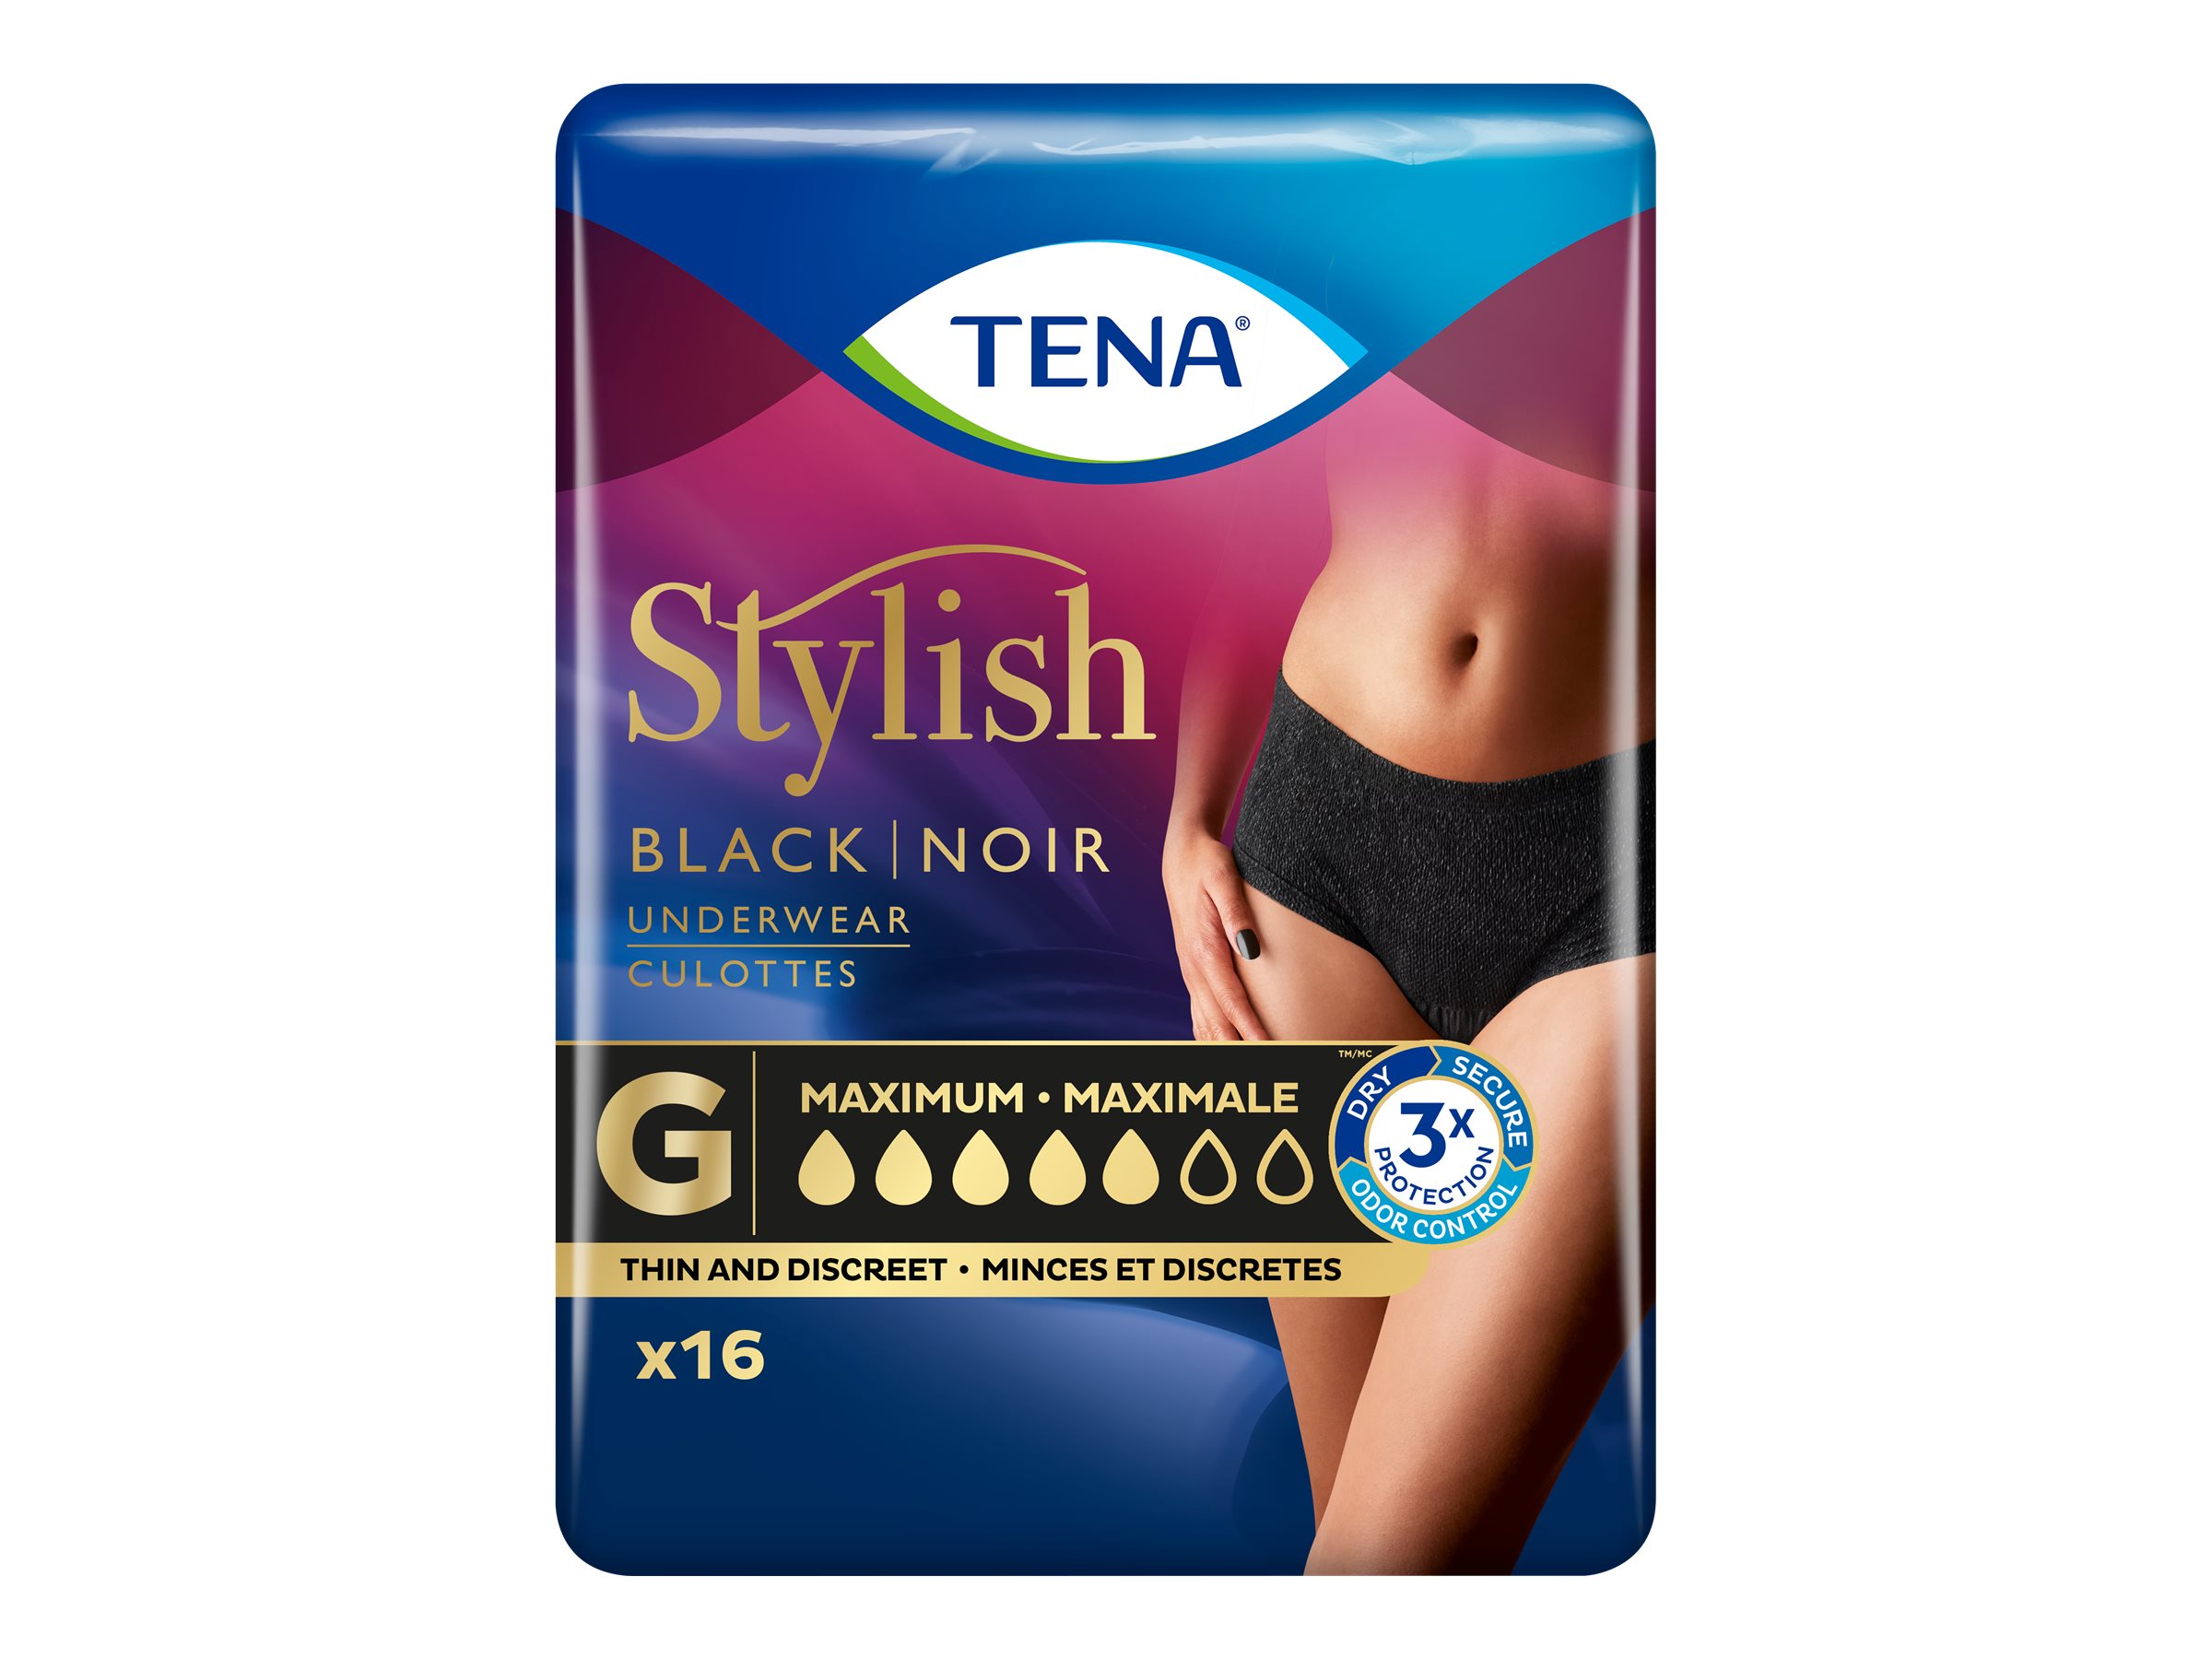 TENA WOMENS STYLISH UNDER GARMENT - general for sale - by owner - craigslist